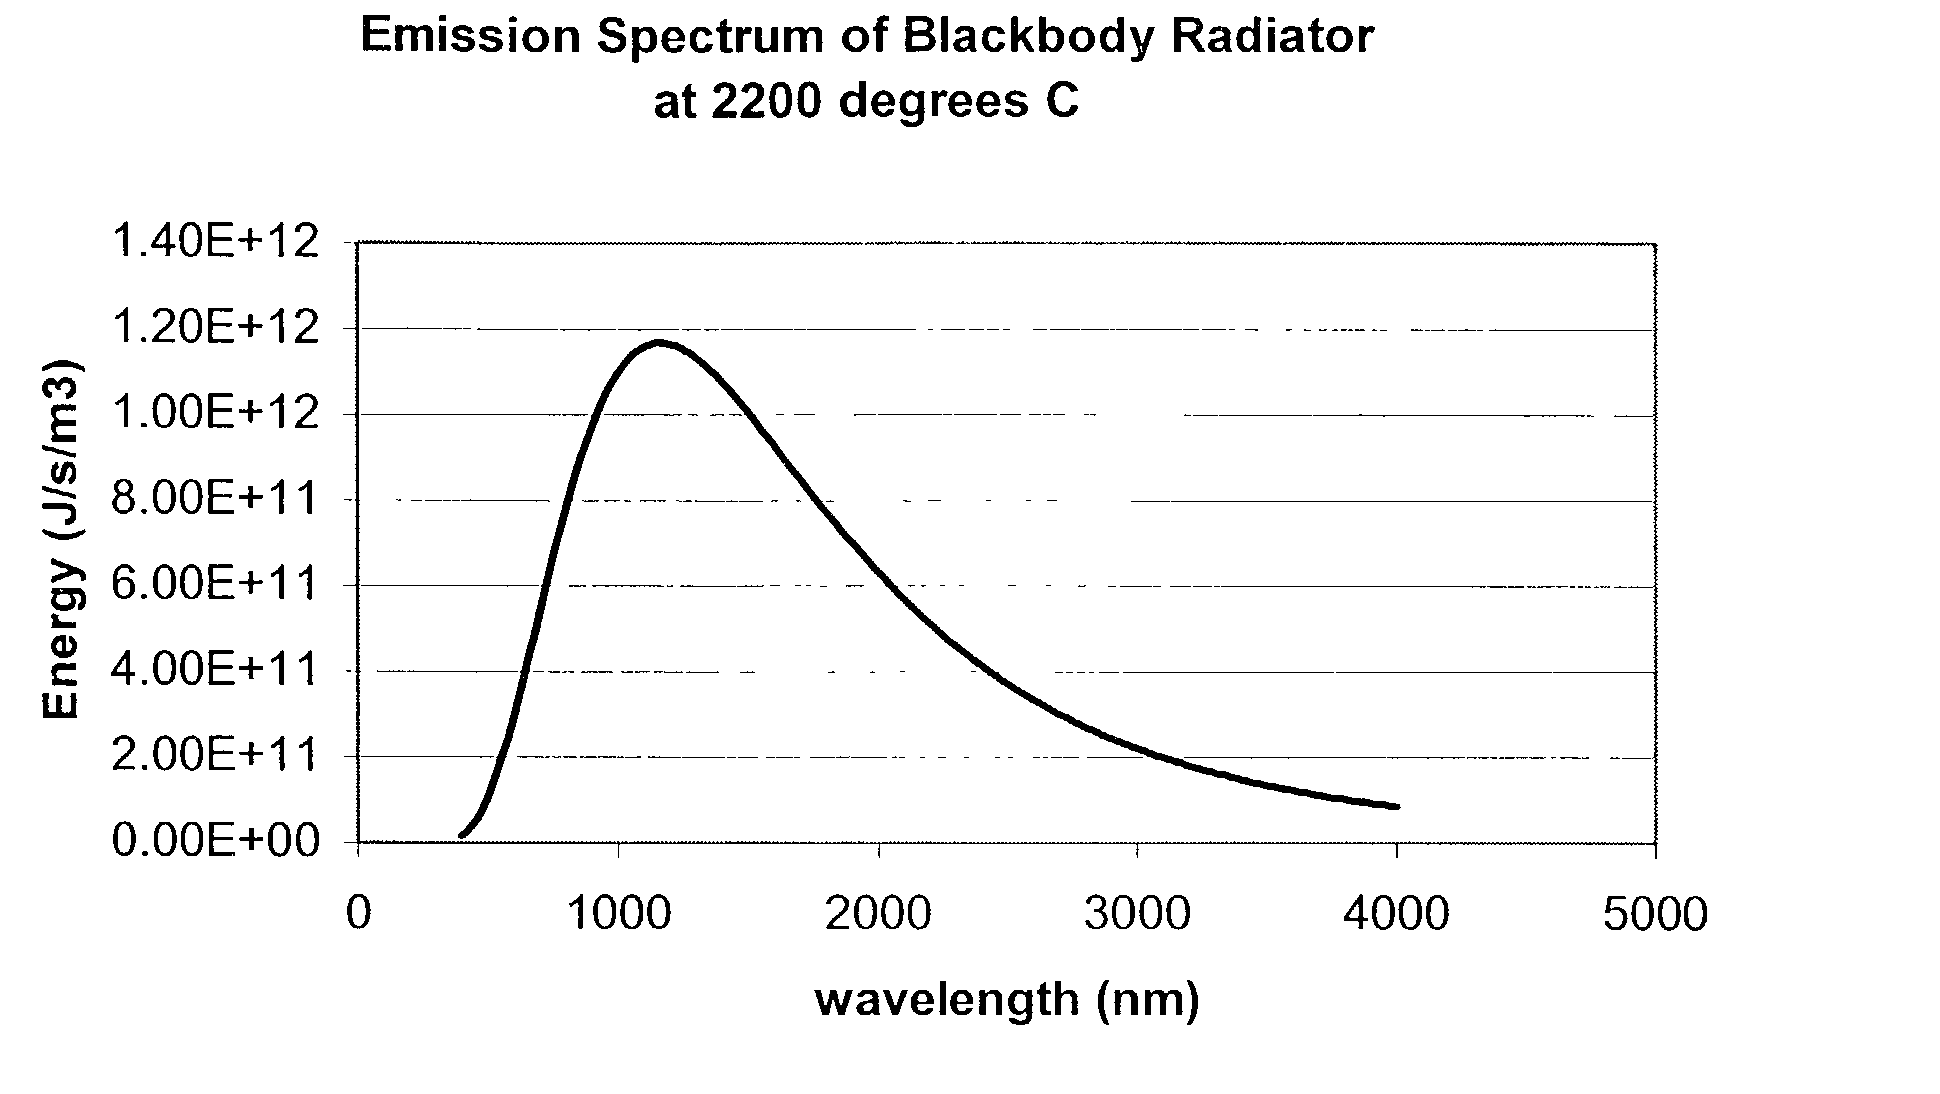 Glassy carbon thermoplastic compositions